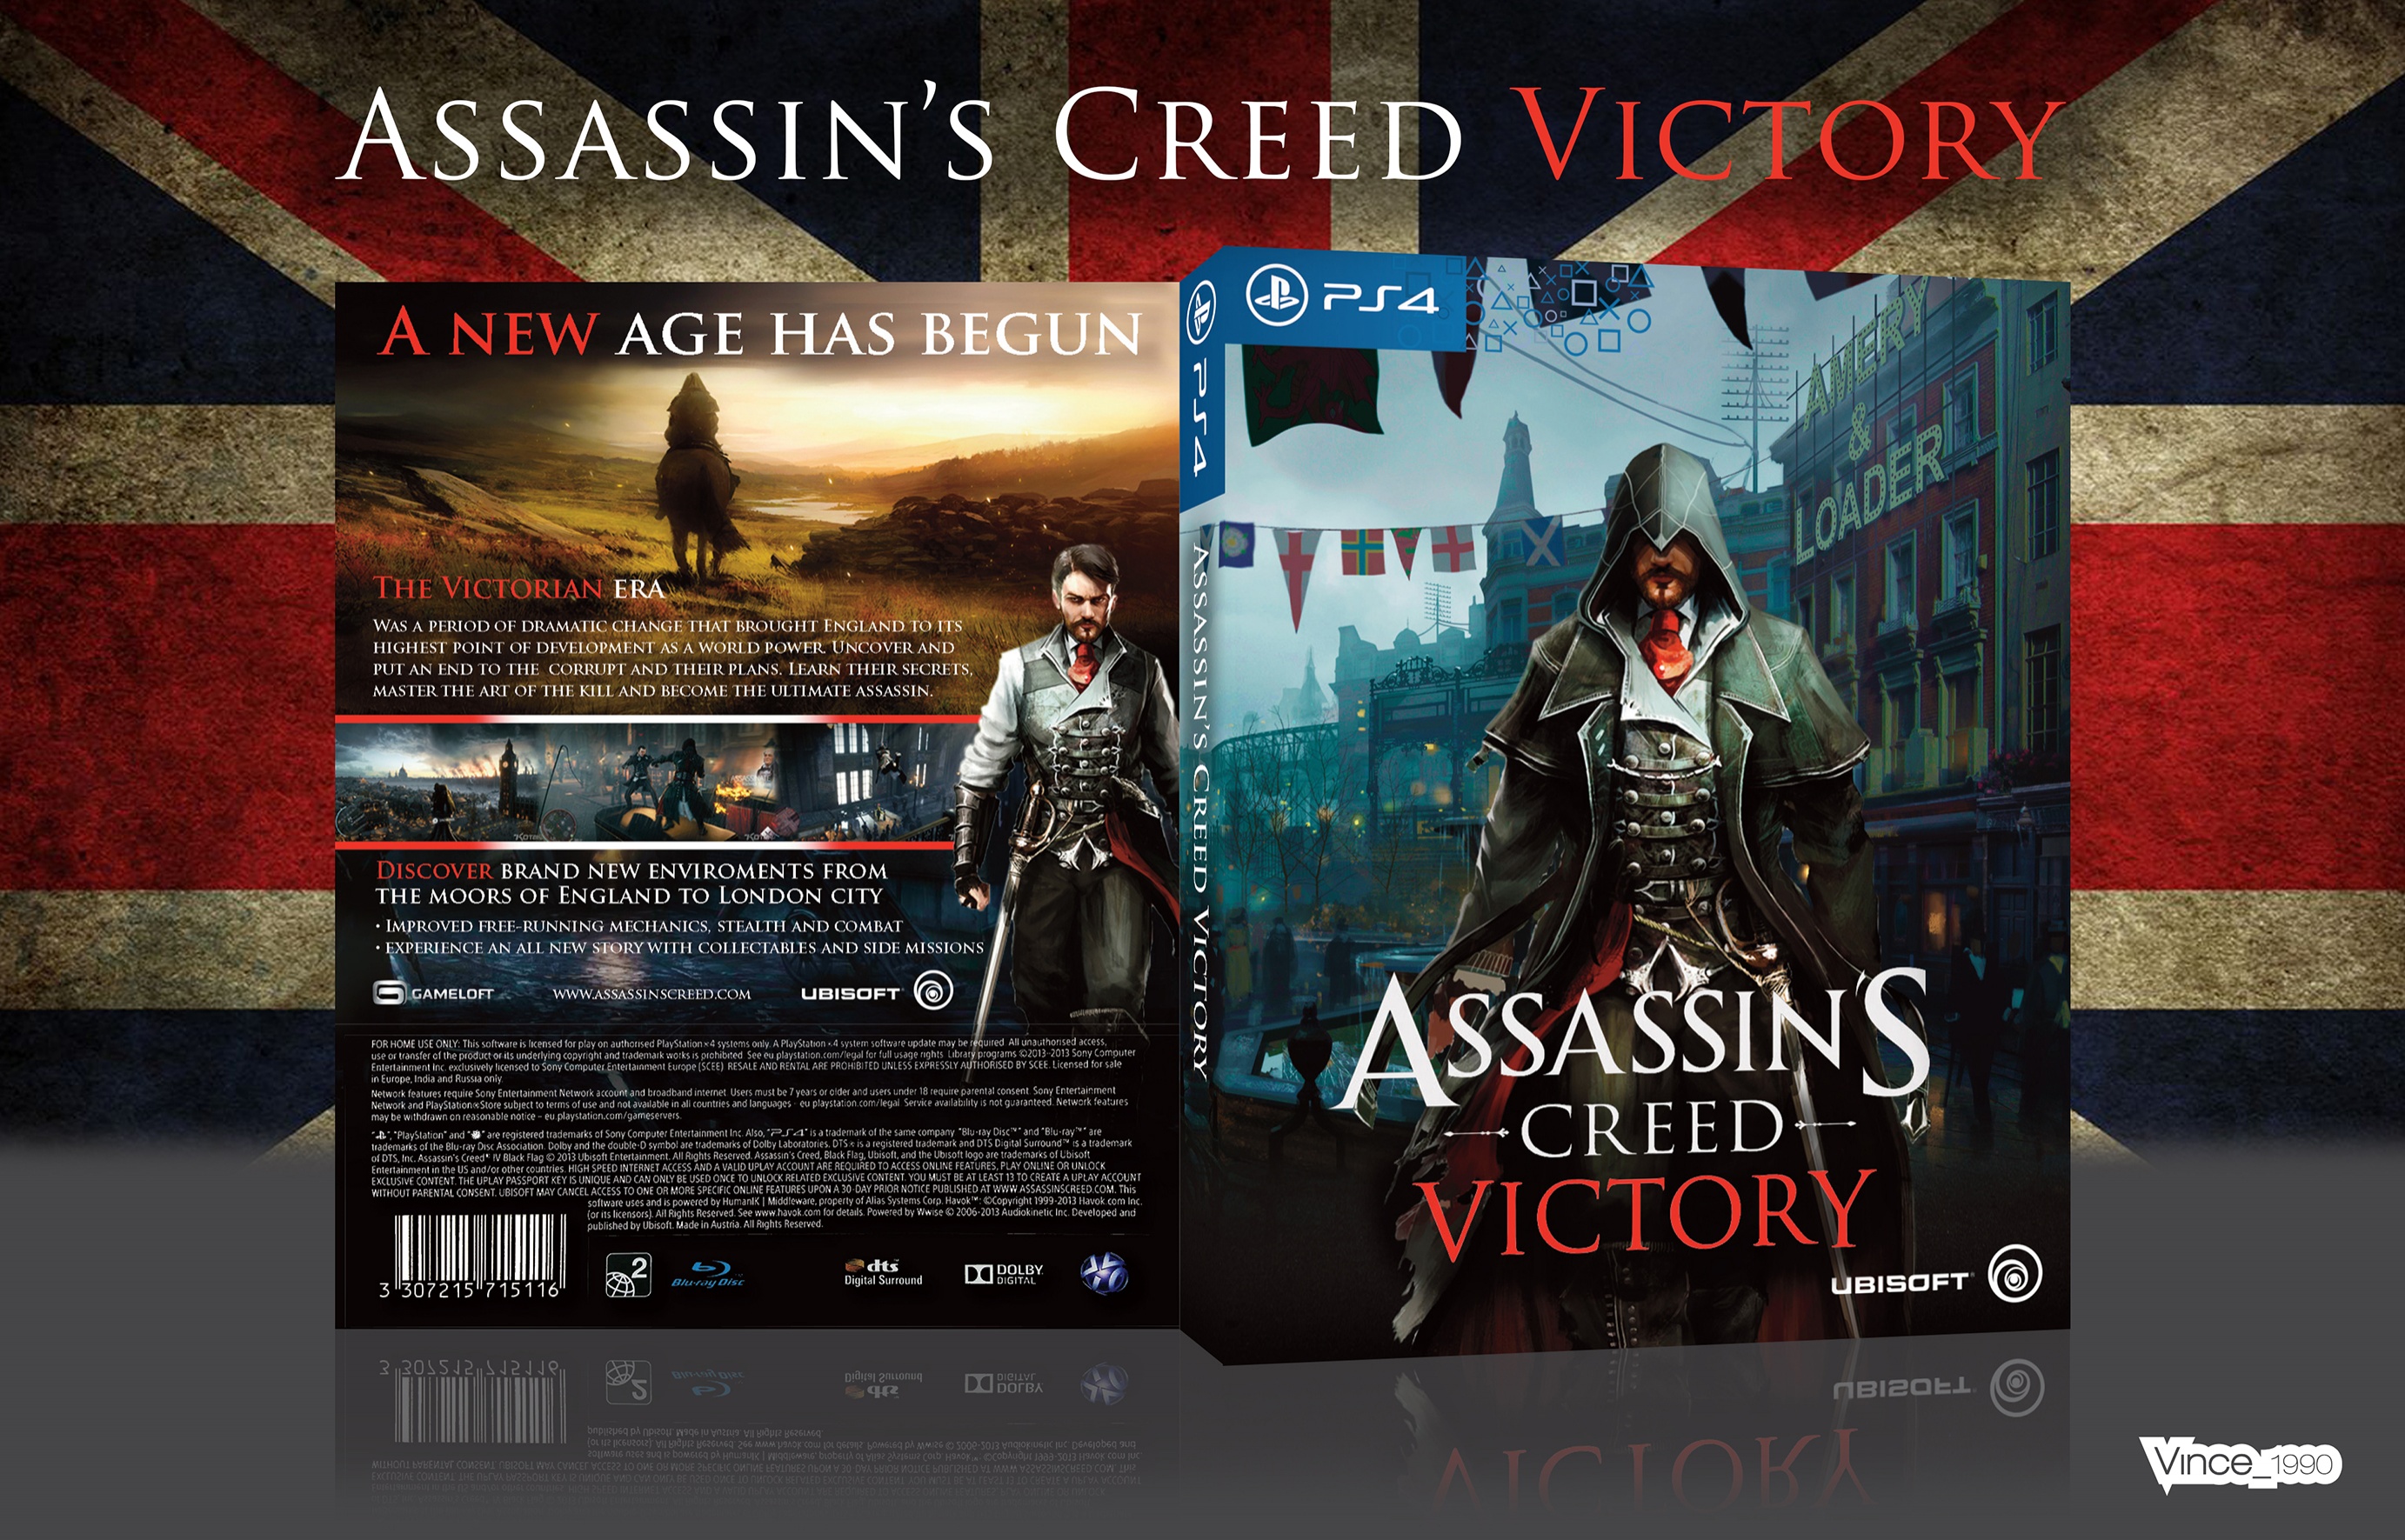 Assassin's Creed Victory box cover